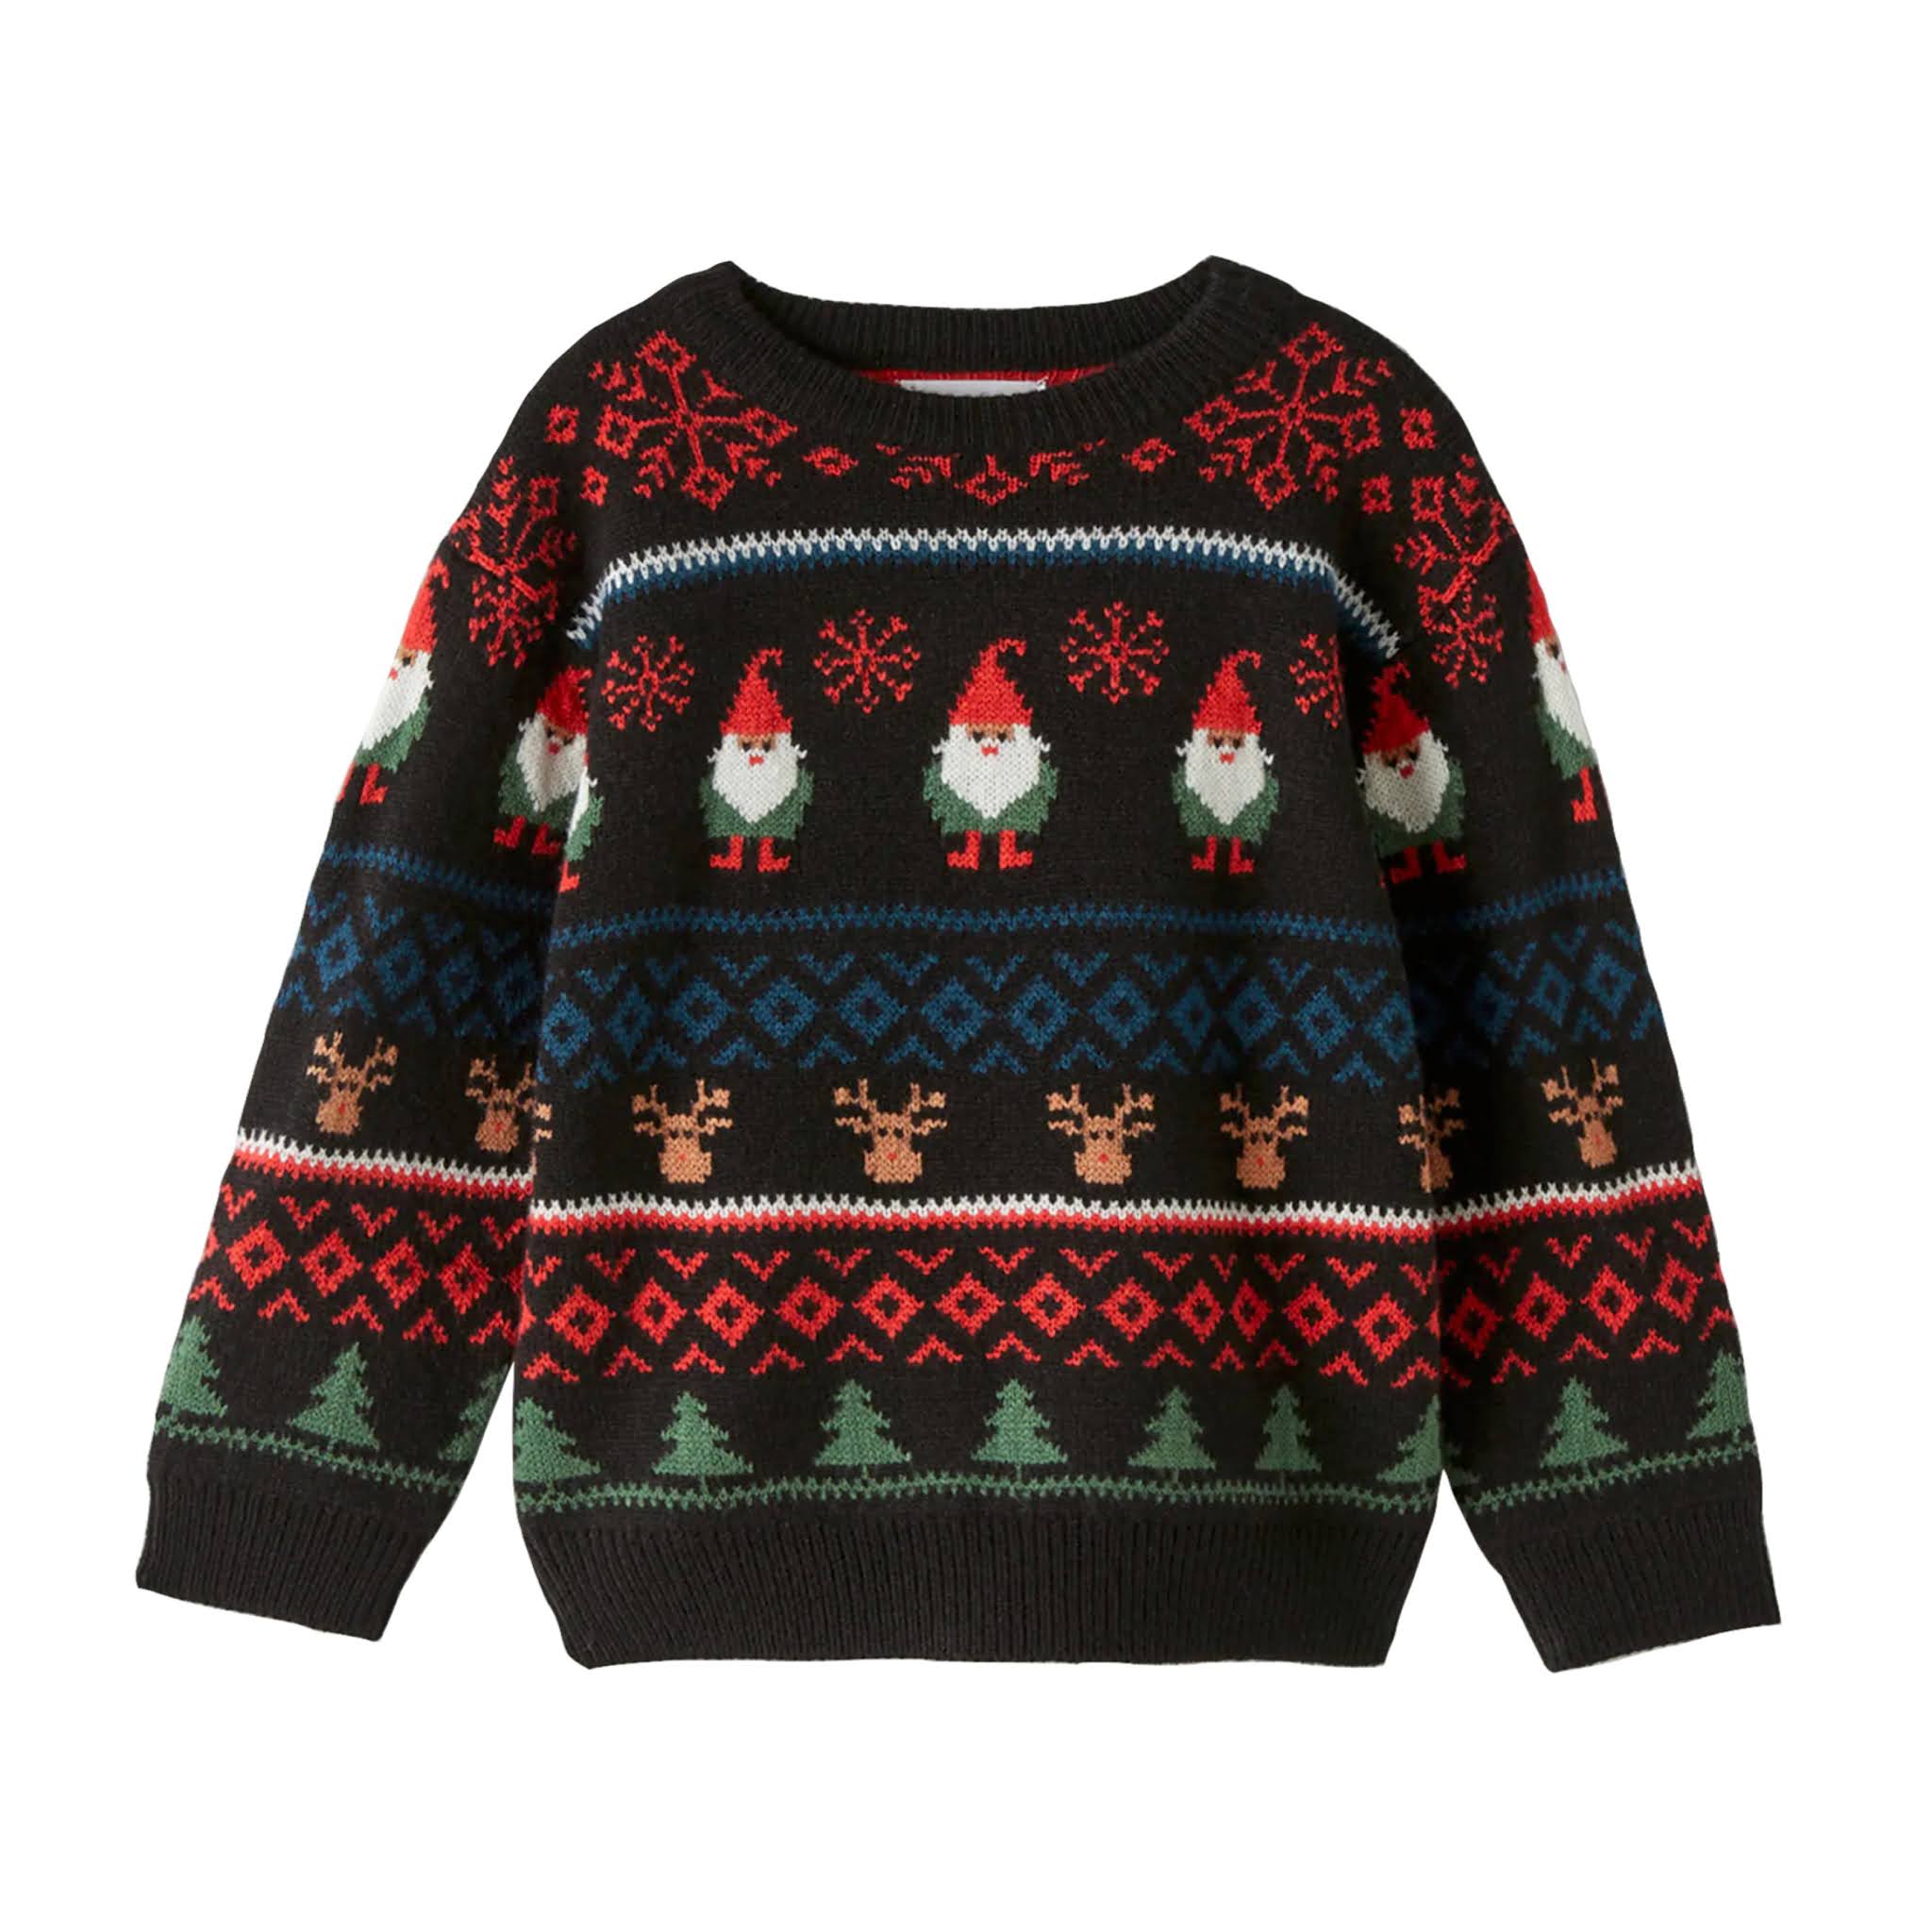 (Not So) Ugly Christmas Sweaters for Kids | Little Style Inspo